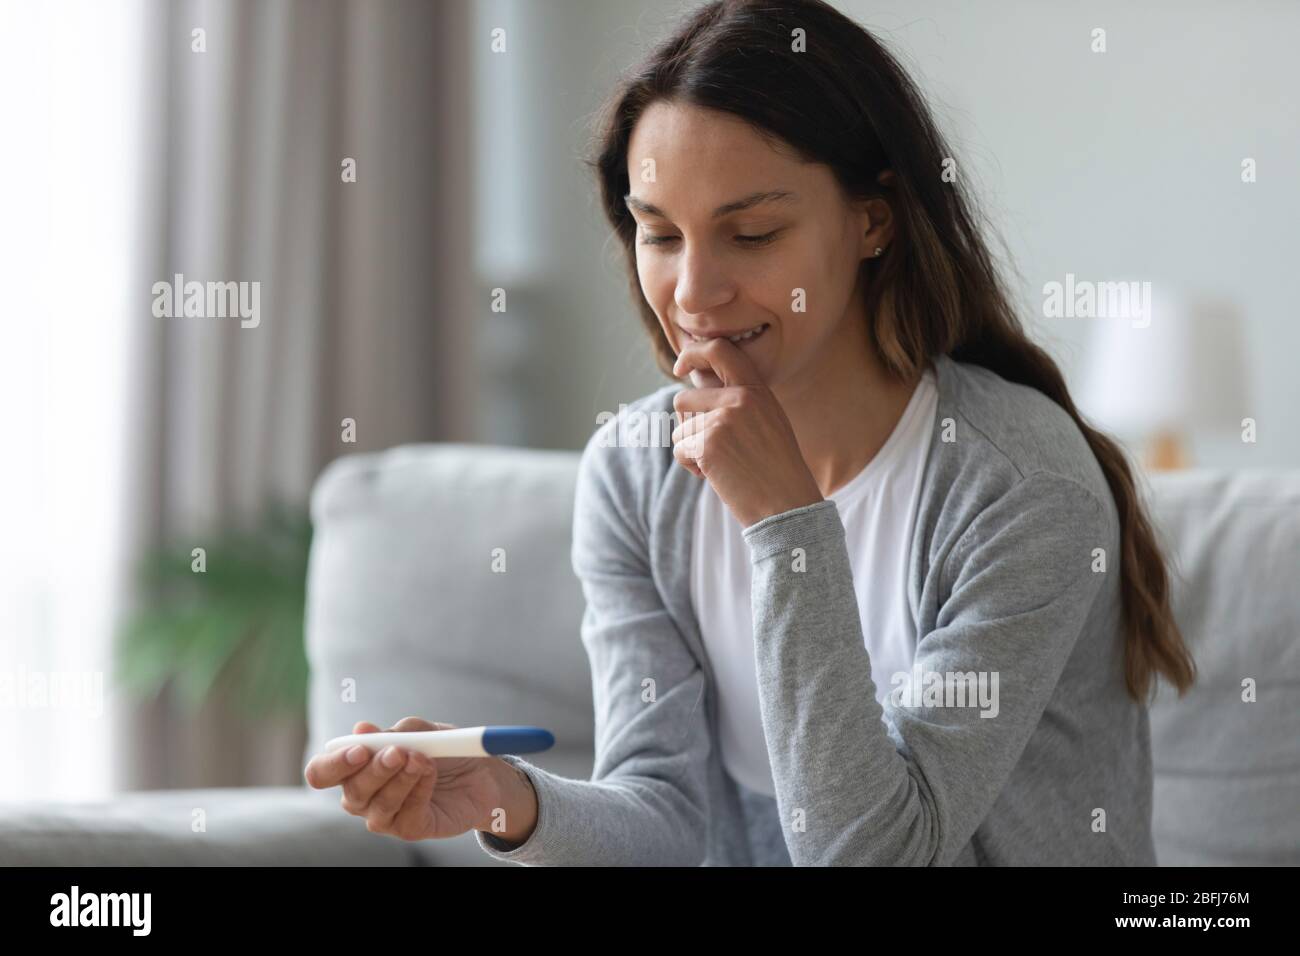 Nervous young woman waiting for pregnancy test result close up Stock Photo